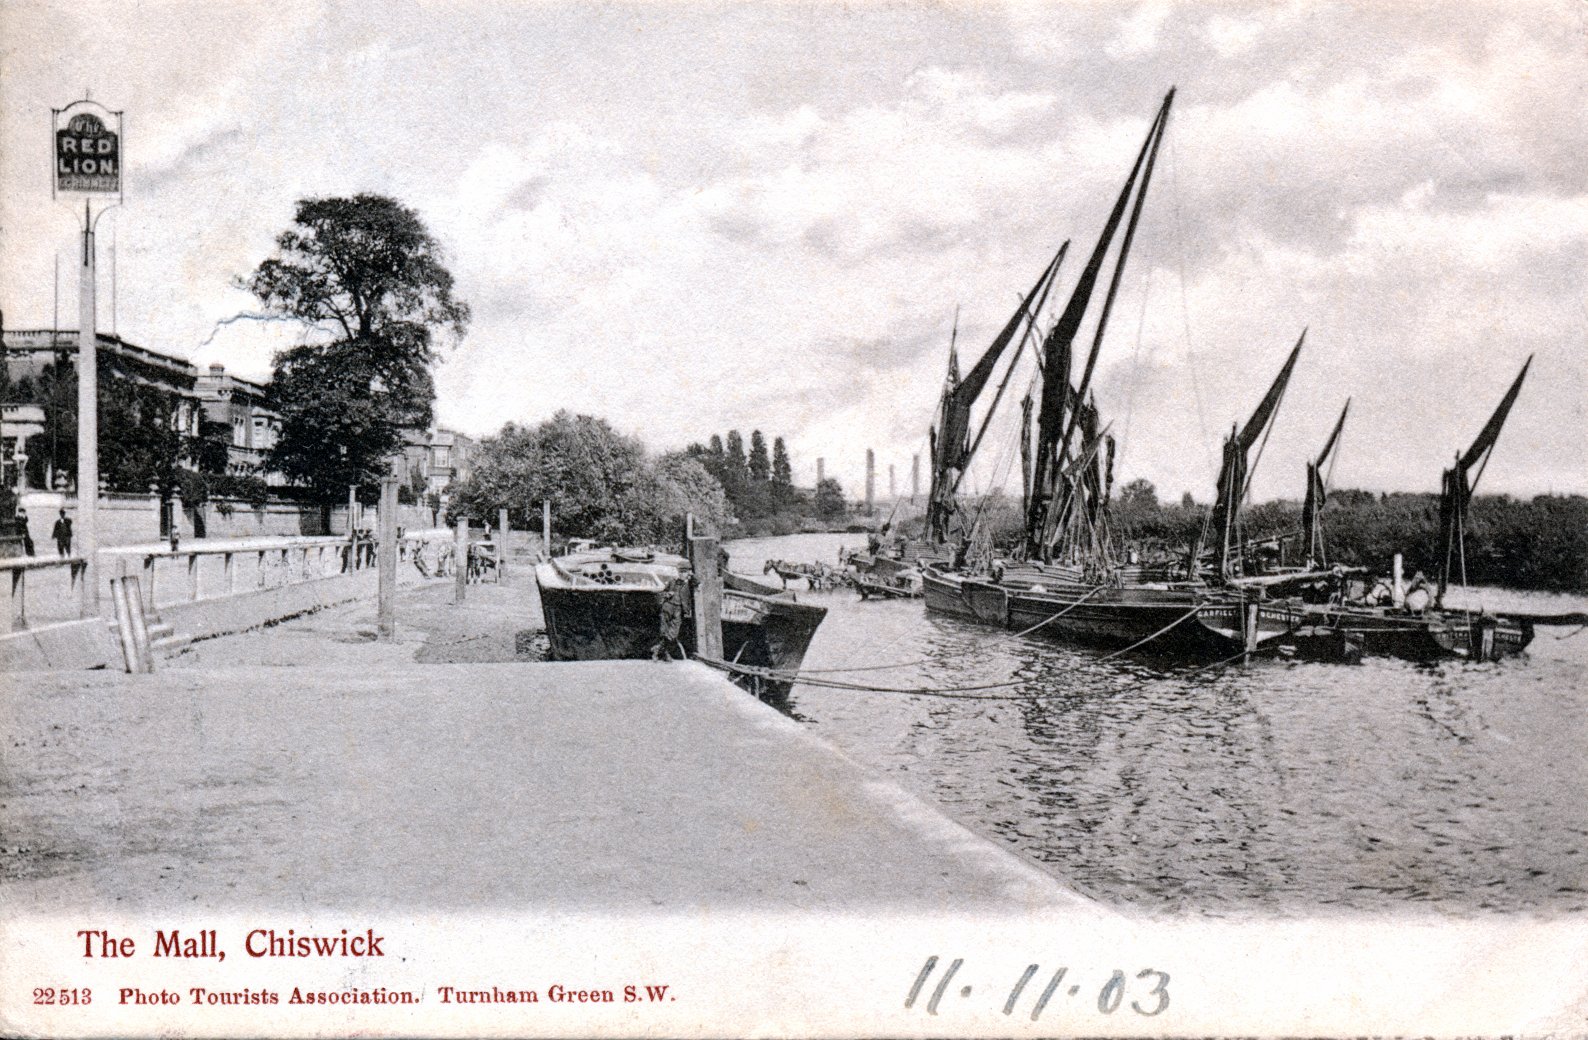 Chiswick Mall,Chiswick Eyot,hotels and inns Red Lion,river view,horse unloading barge